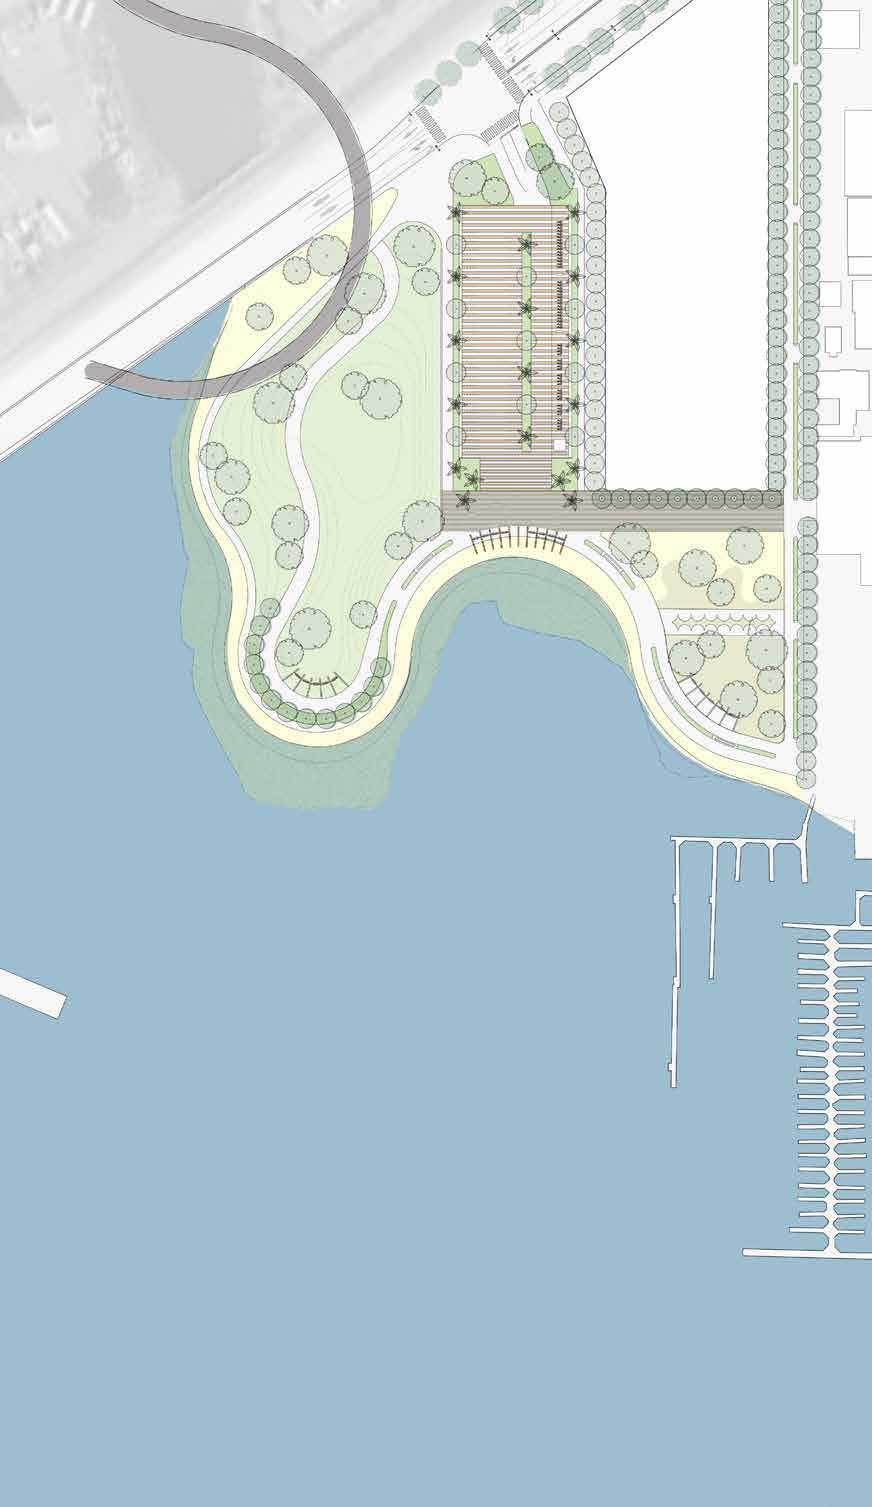 Channel Park is designed to encourage passive recreation and a connection to both the estuary and channel. It will be an important wayfinding point for the trail network.